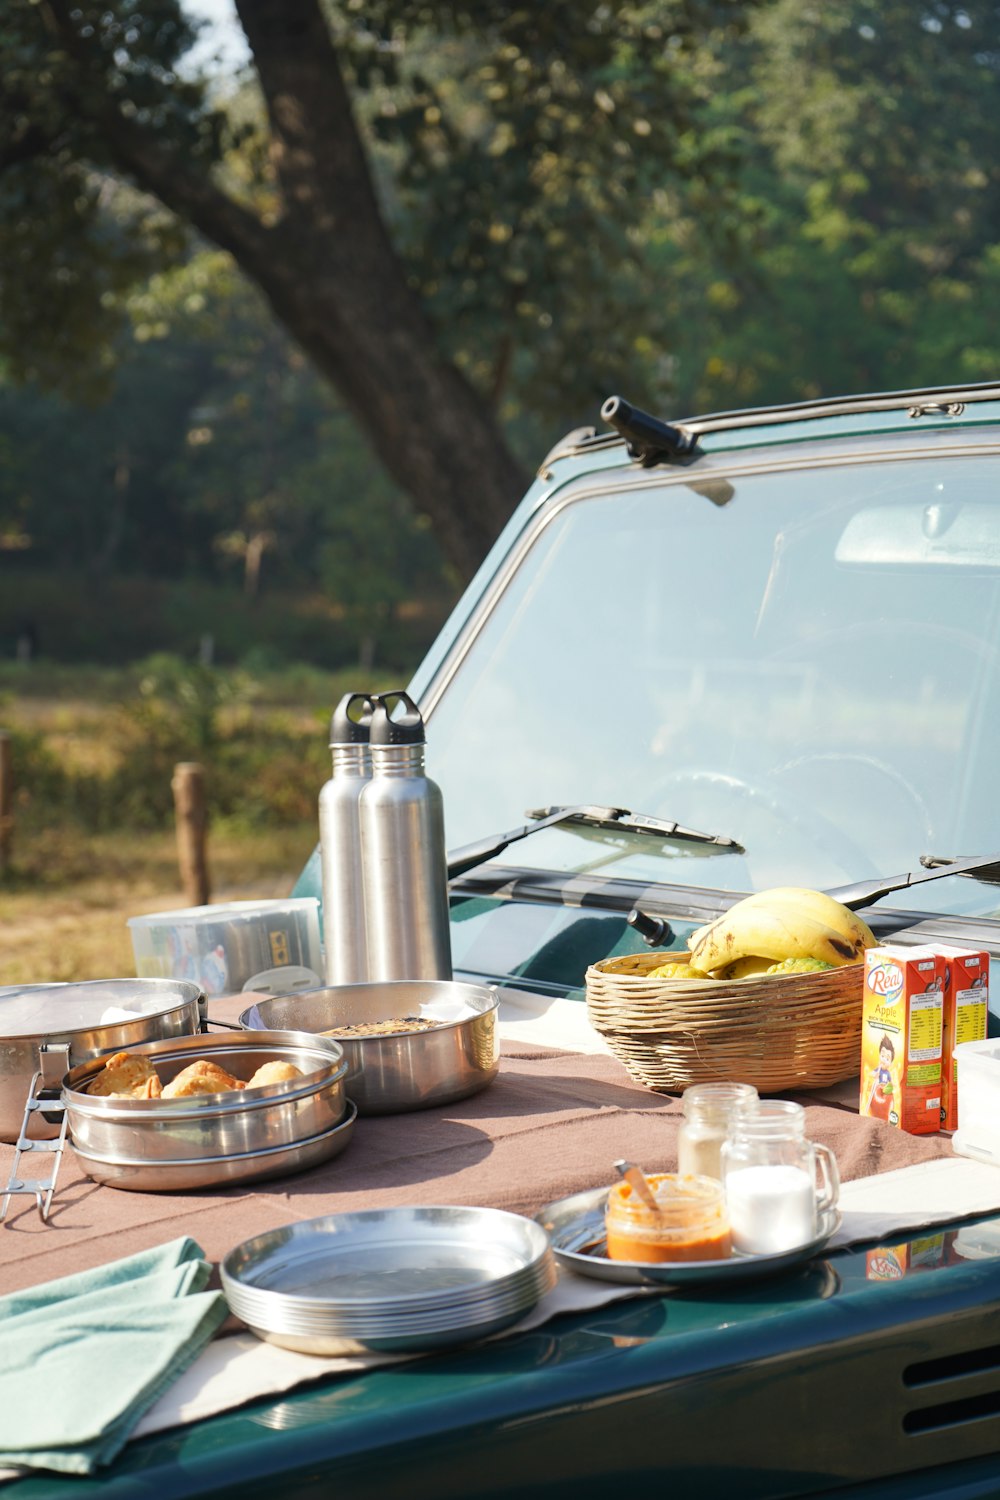 a picnic table with food on it and a car in the background